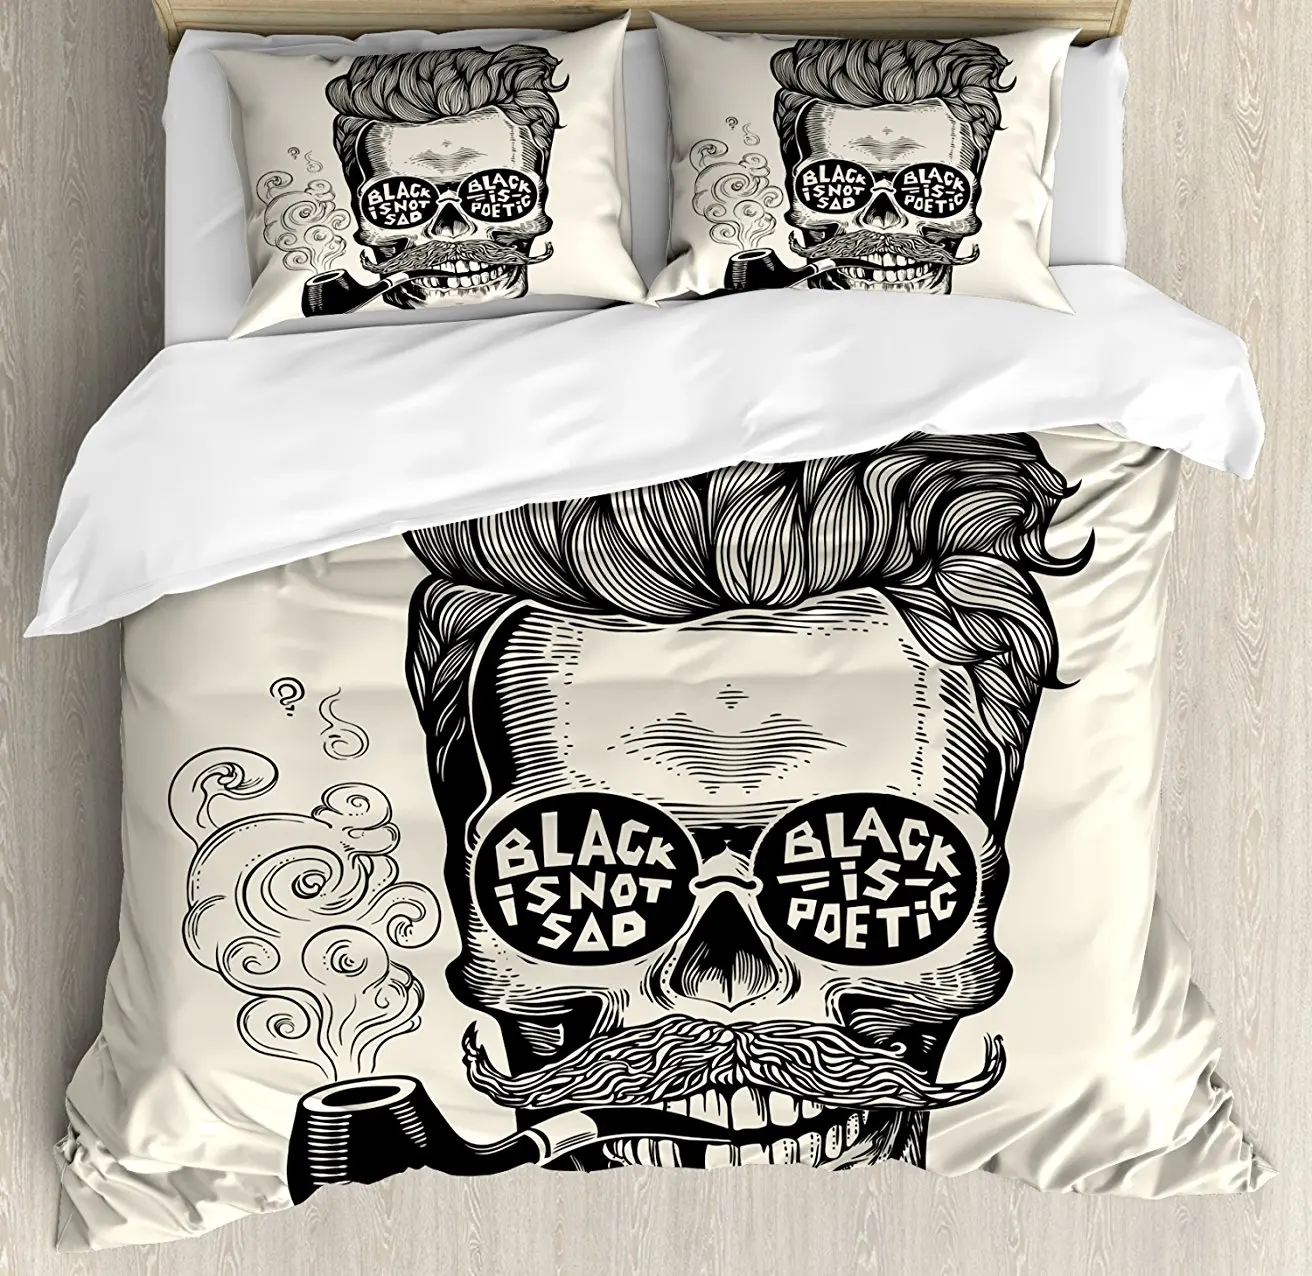 

Indie Duvet Cover Set Hipster Gentleman Skull with Mustache Pipe and Eyeglasses with Inscription Vintage 4 Piece Bedding Set